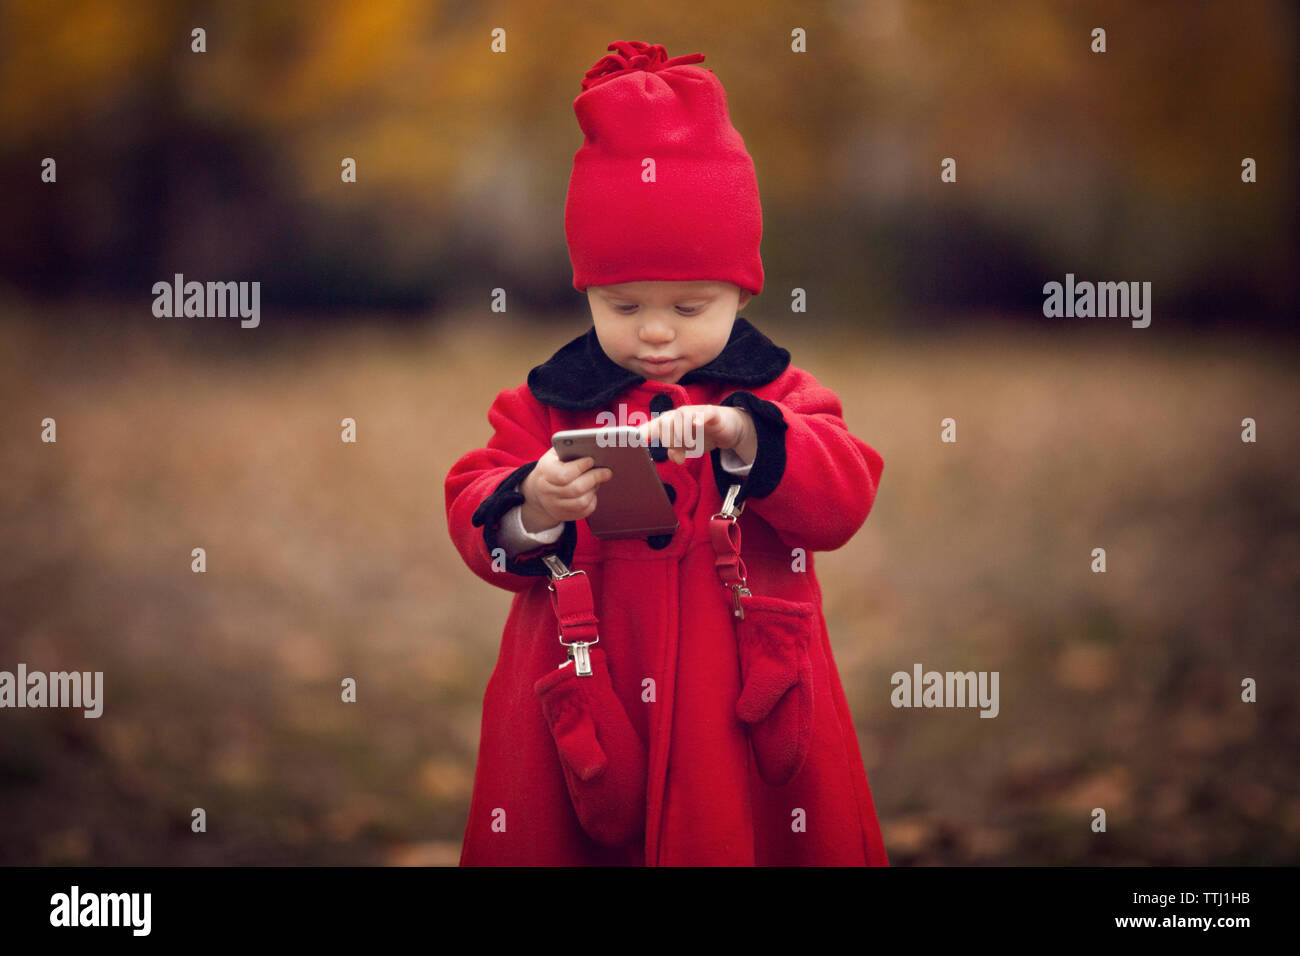 Cute baby girl using smart phone while standing on field Stock ...